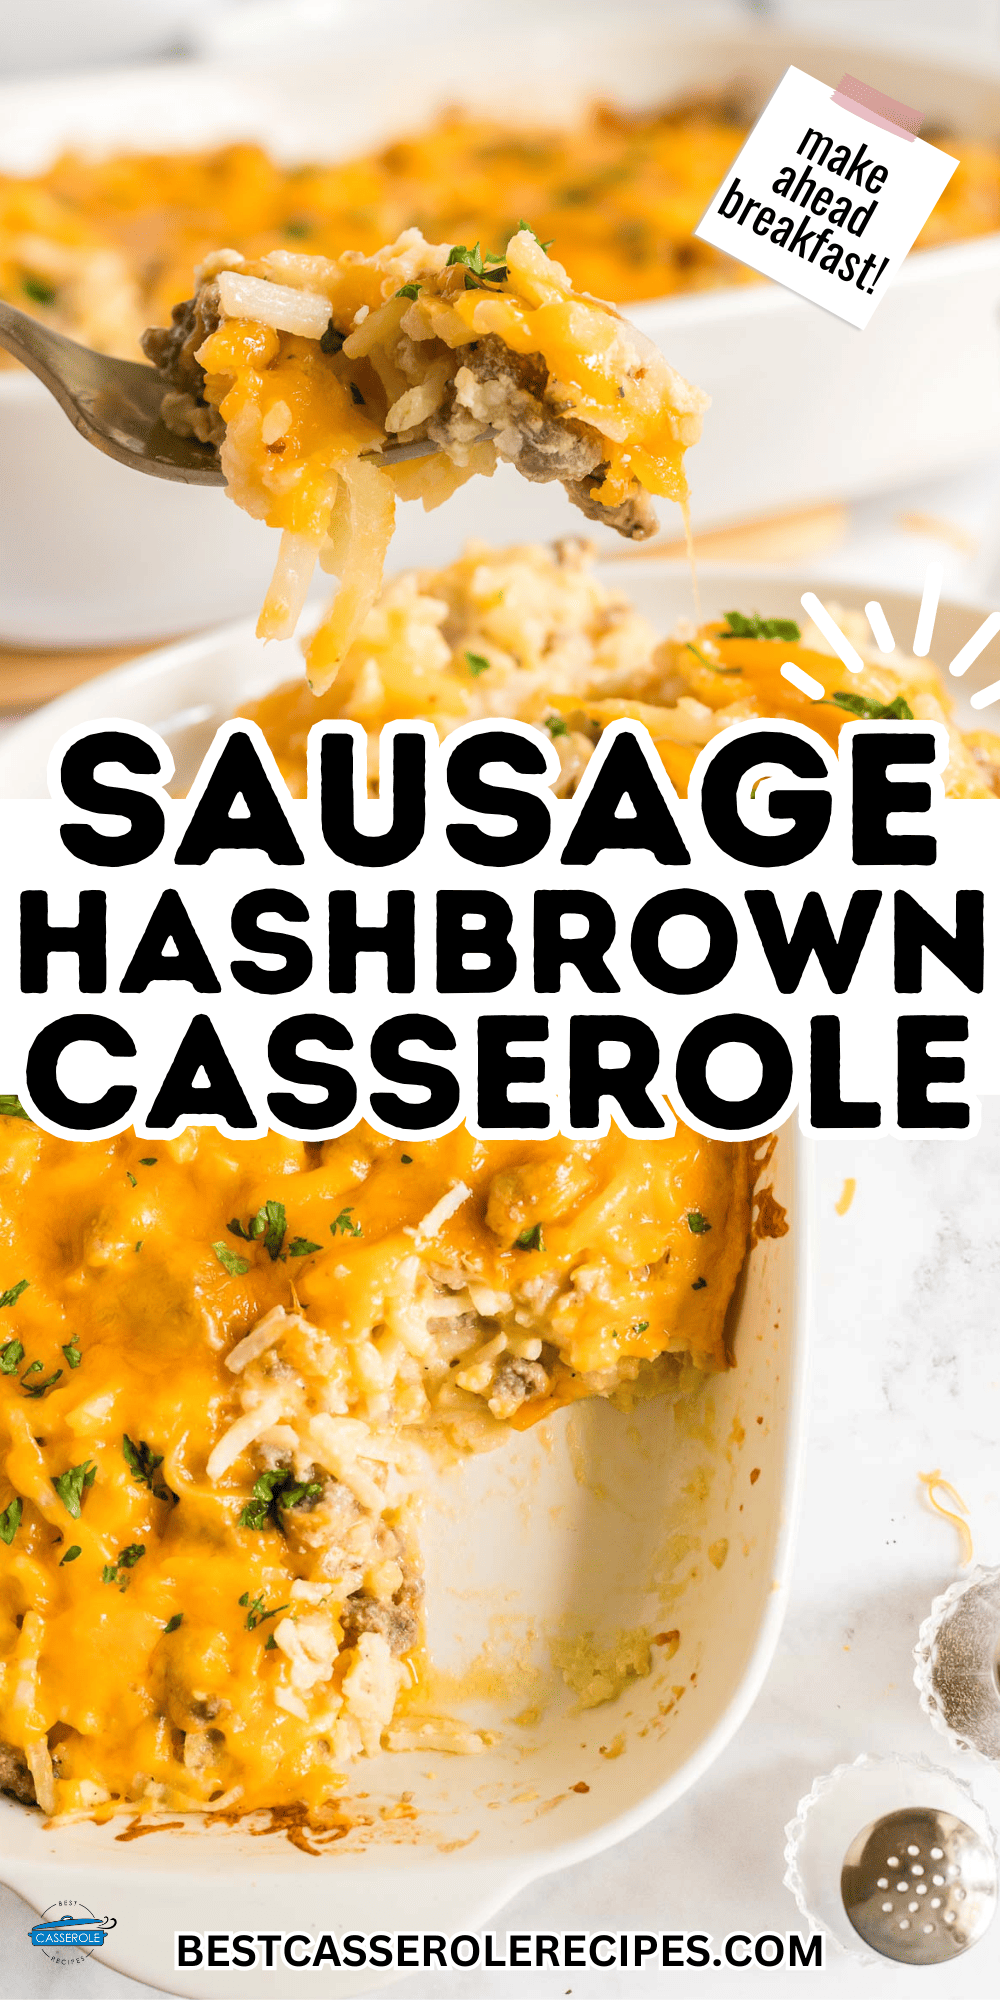 sausage hashbrown casserole is perfect for breakfast, lunch, or dinner